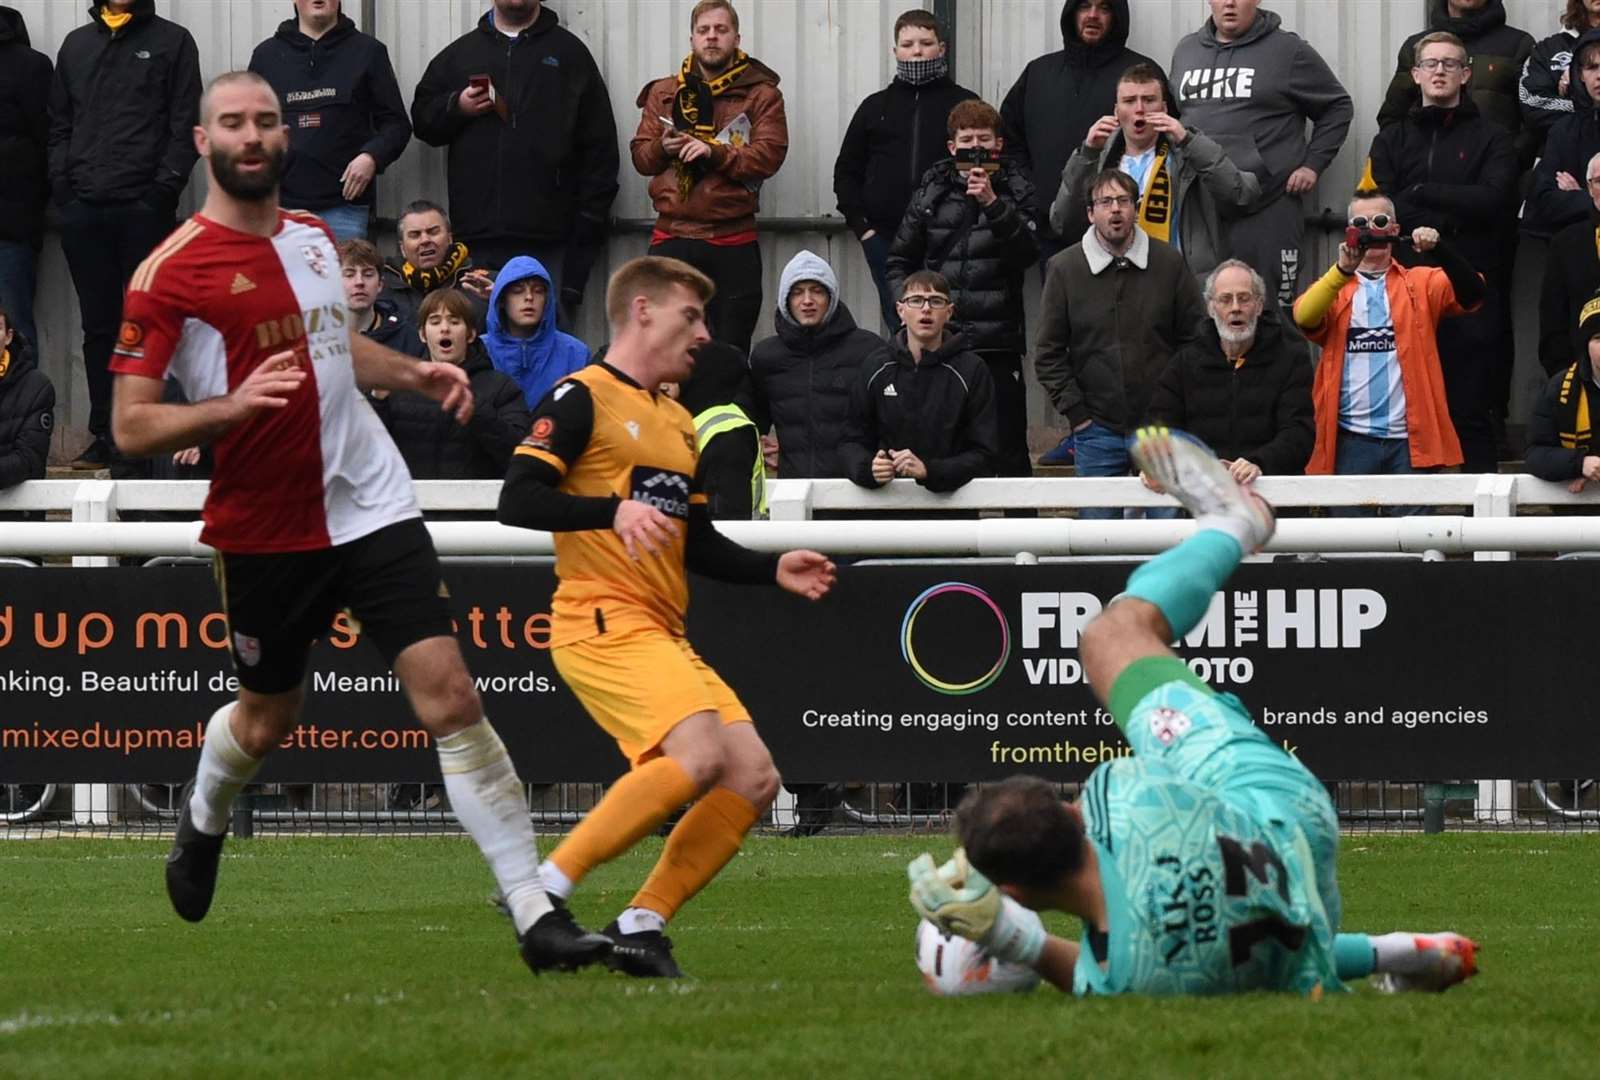 Jack Barham goes close in the second half at Woking. Picture: Steve Terrell